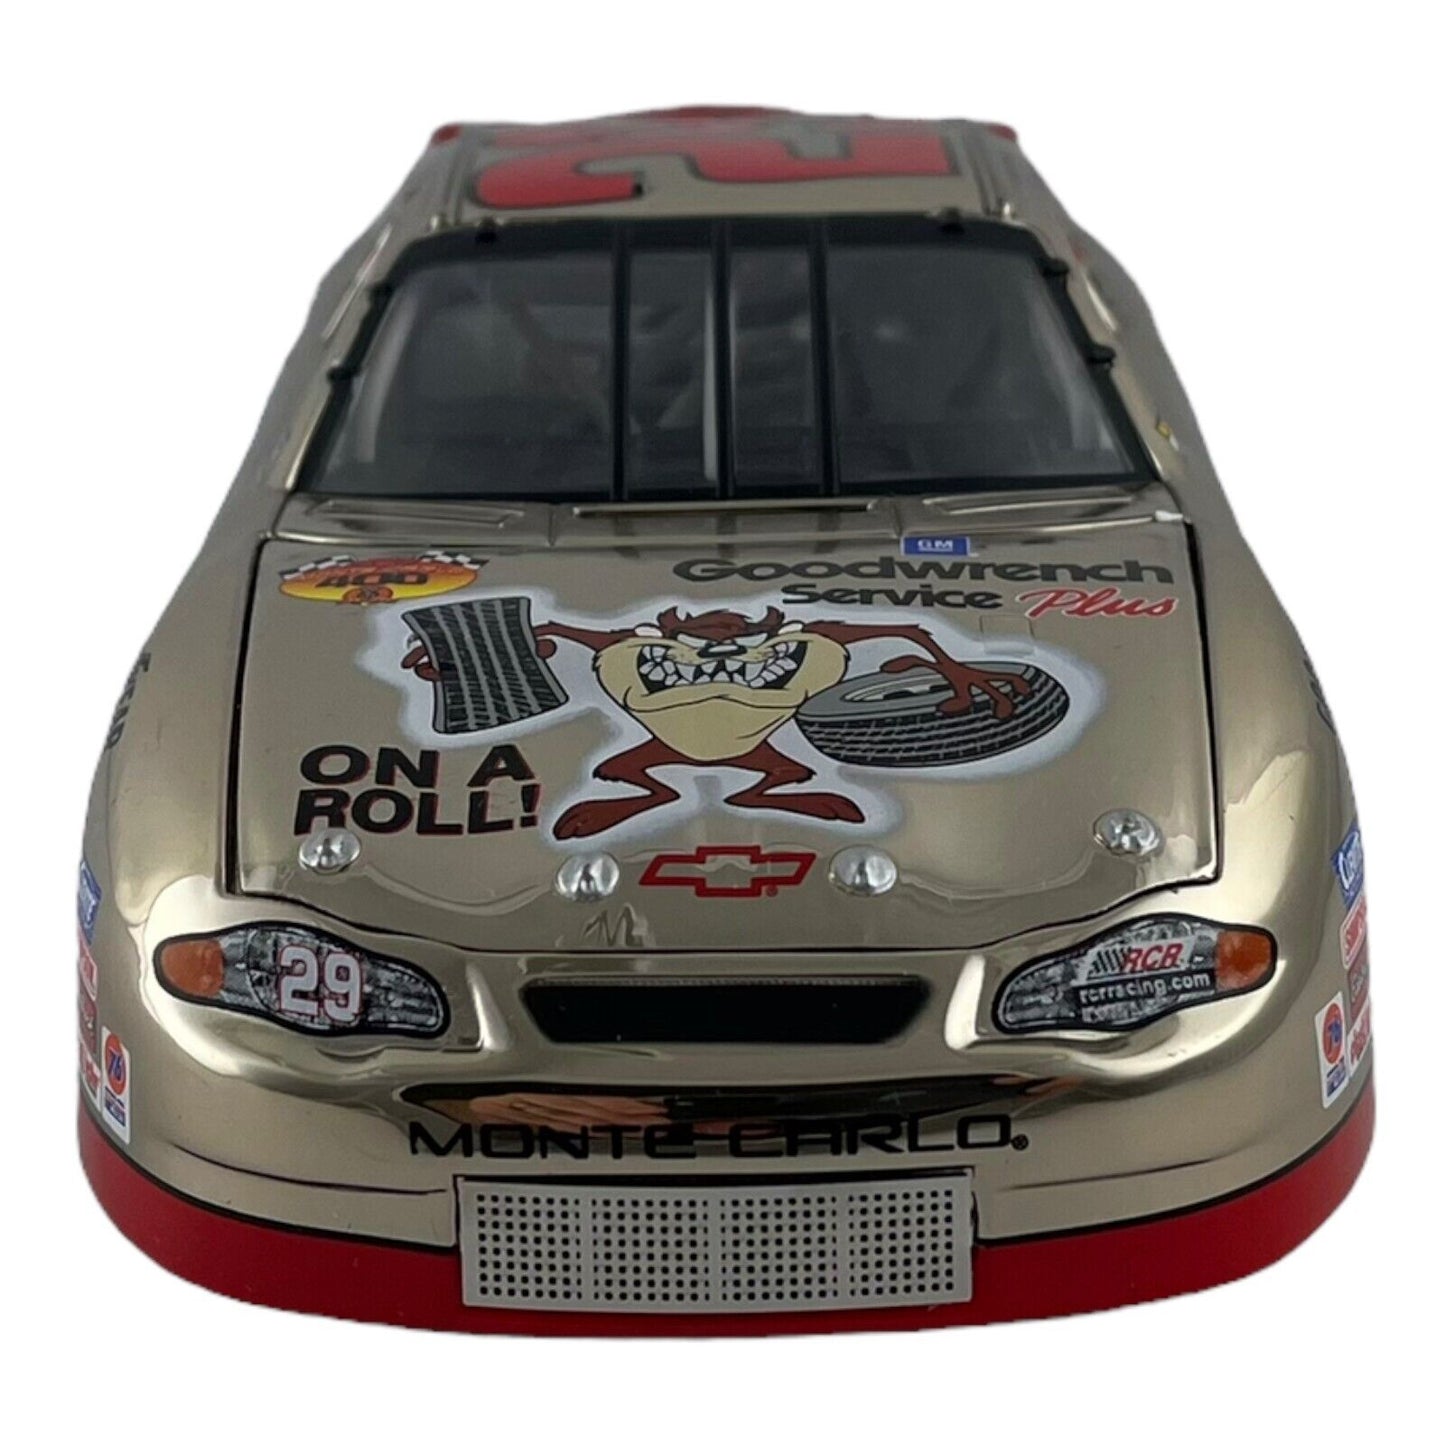 1:24 Scale Kevin Harvick #29 Goodwrench Looney Tunes White Gold Diecast Vehicle